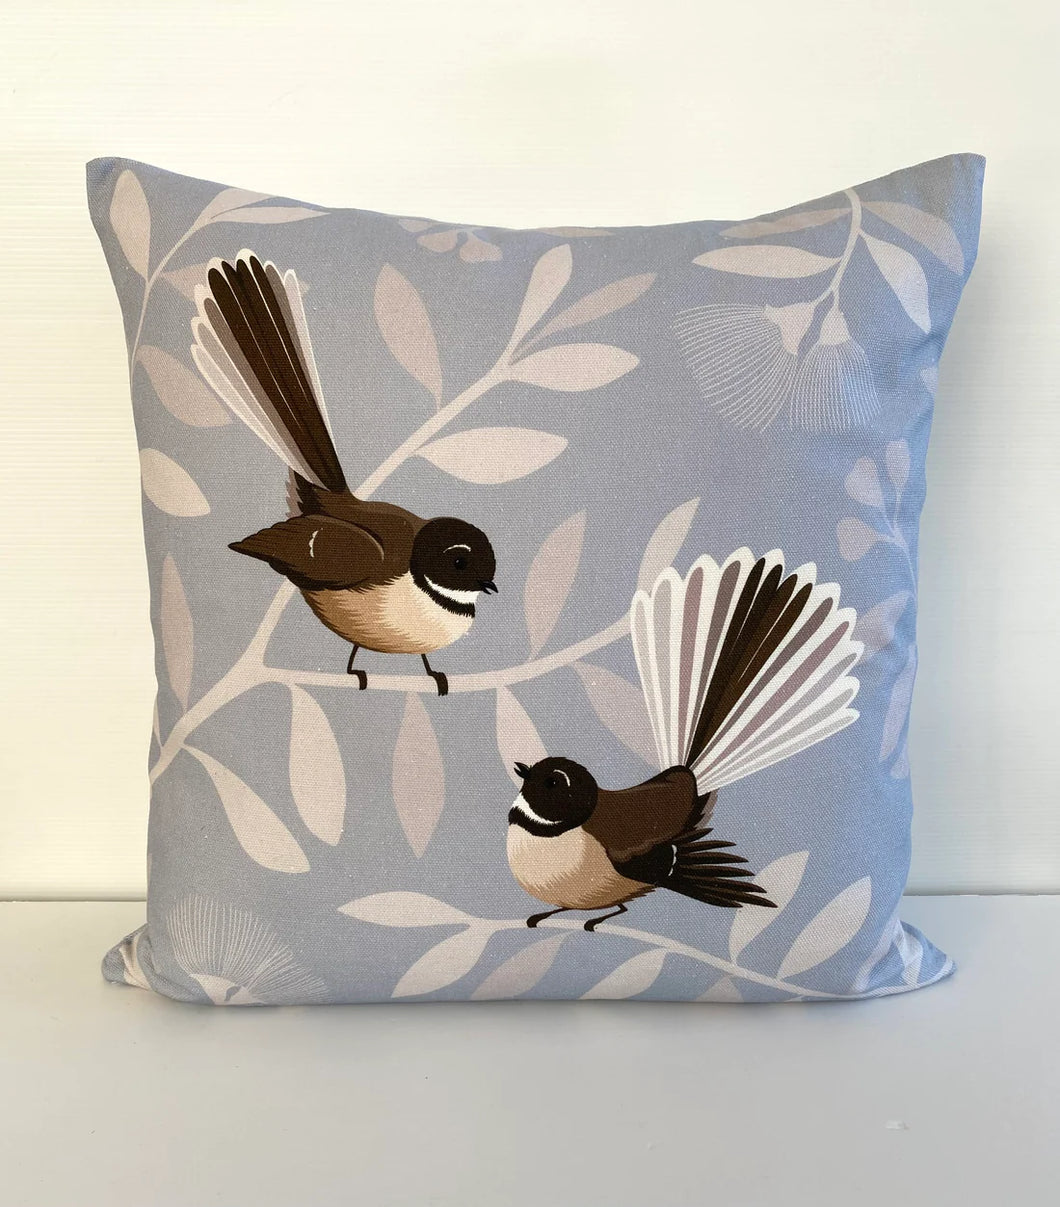 Cushion Cover - Hansby Design - 2 designs